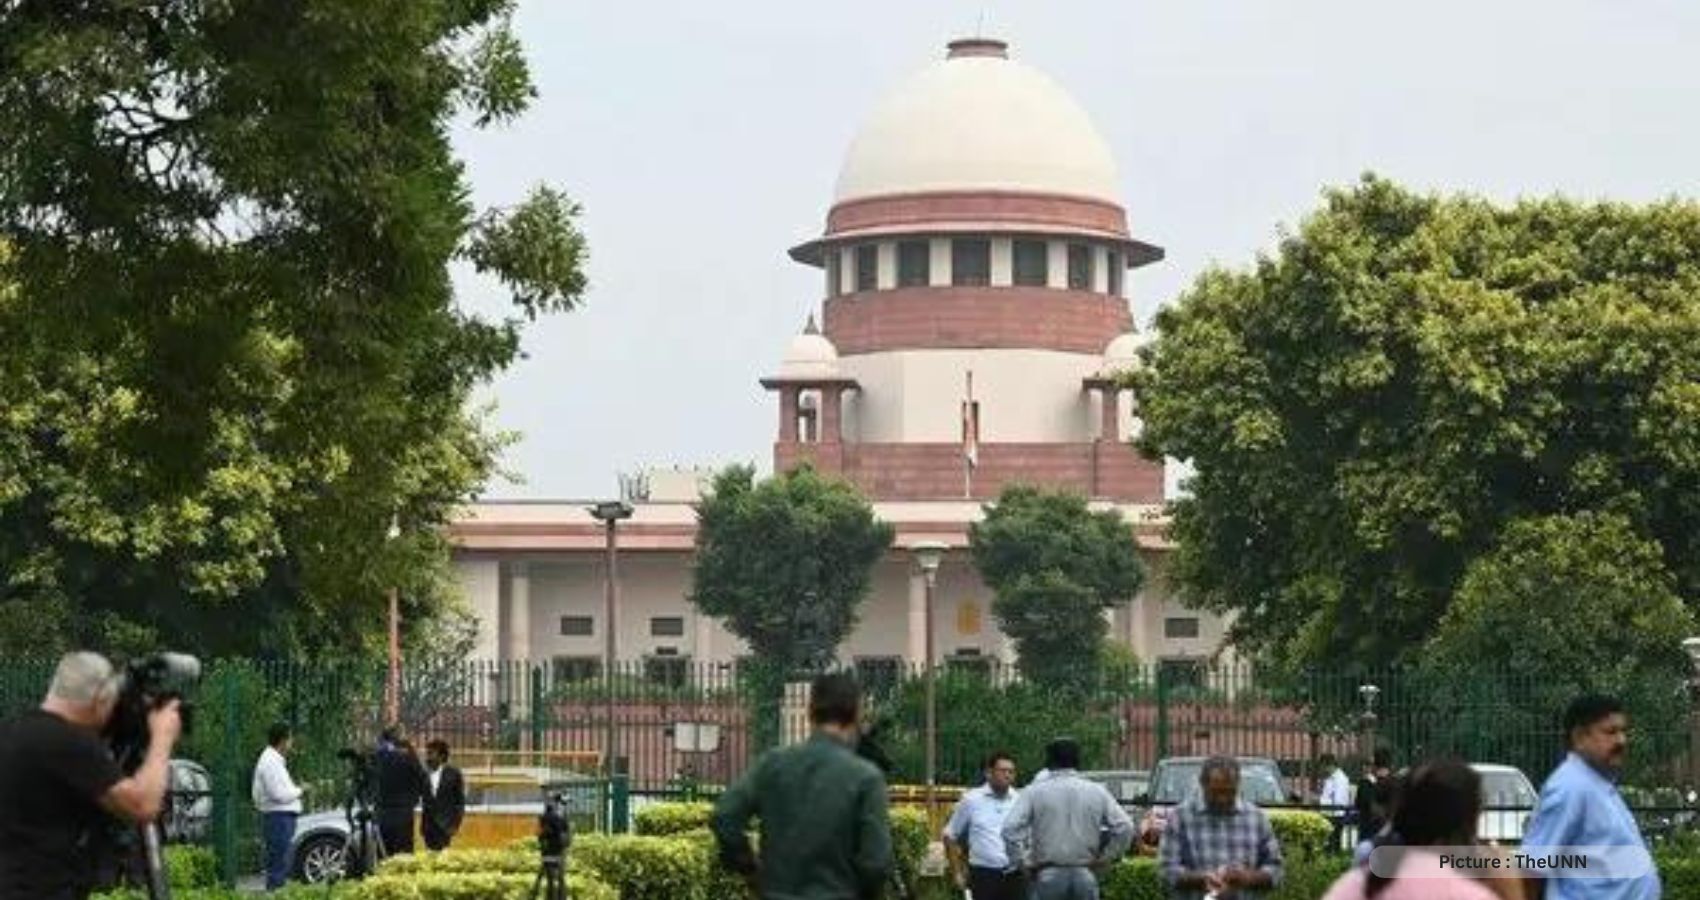 India’s Supreme Court Rules on Same-Sex Marriage